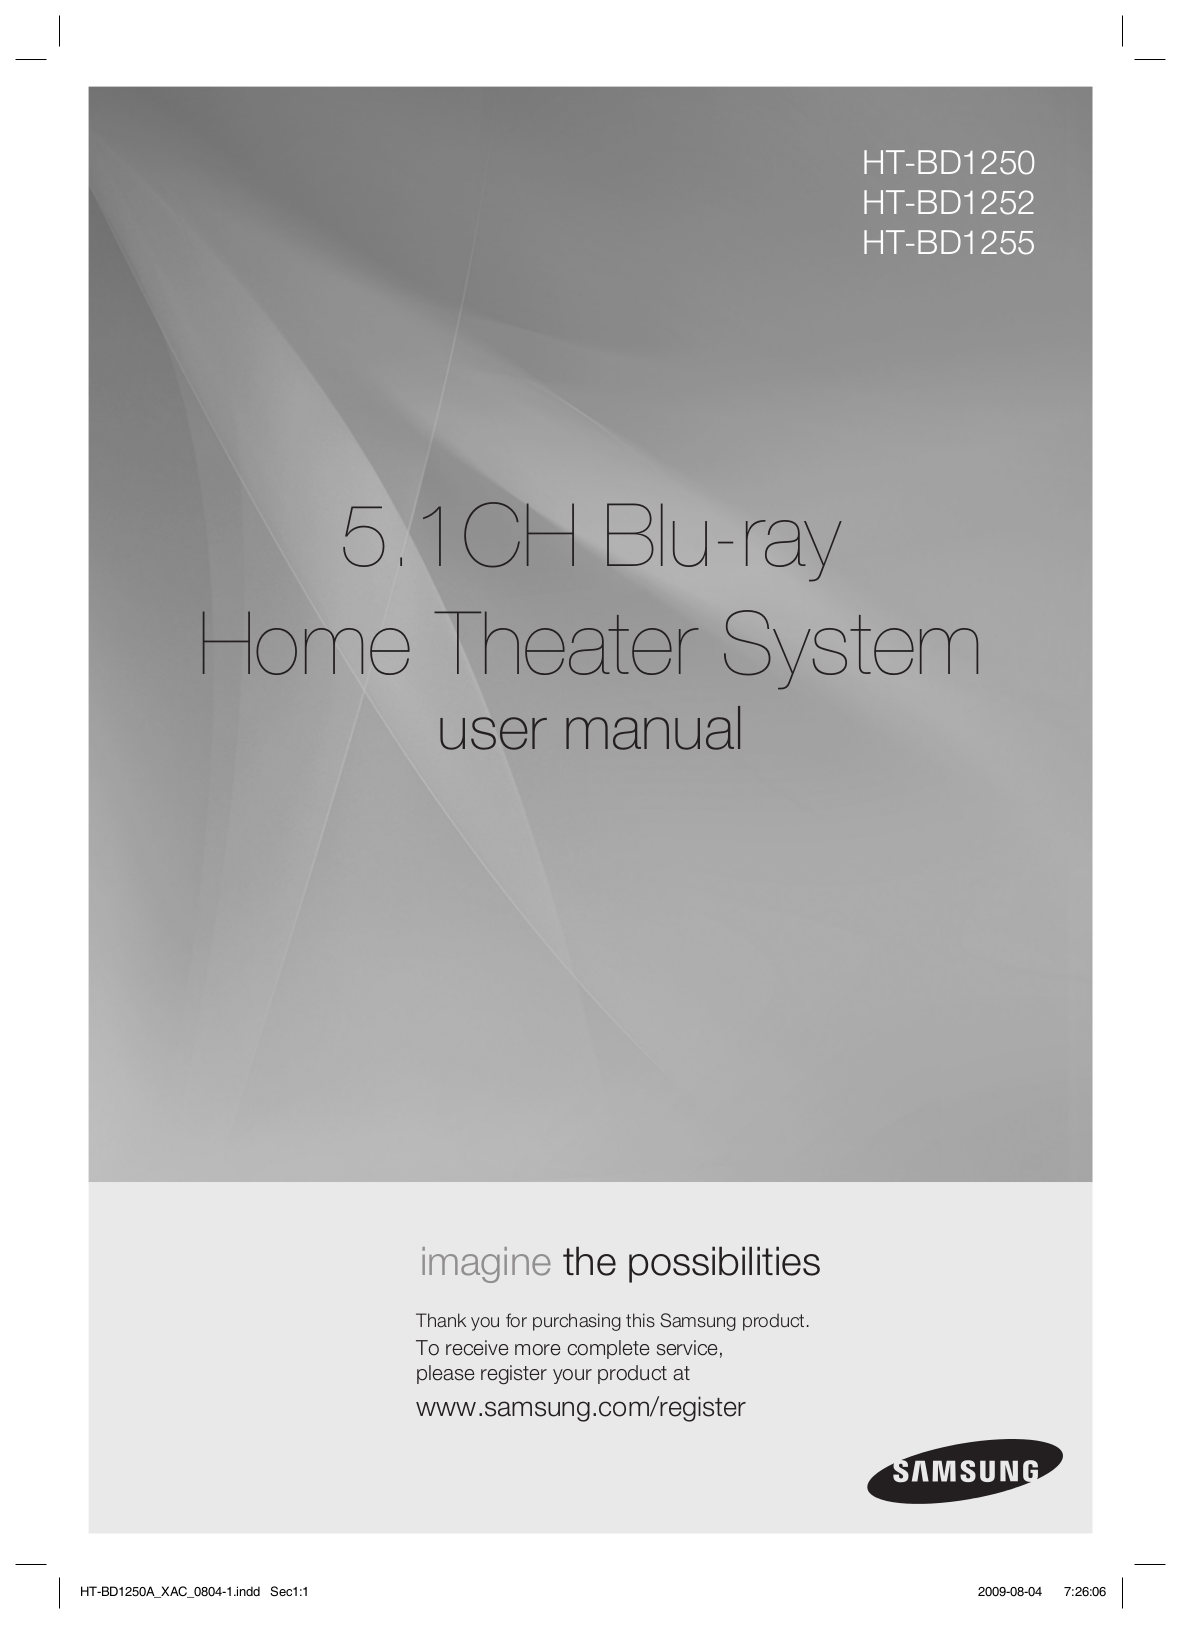 Download free pdf for Samsung HT-BD1250 Home Theater manual